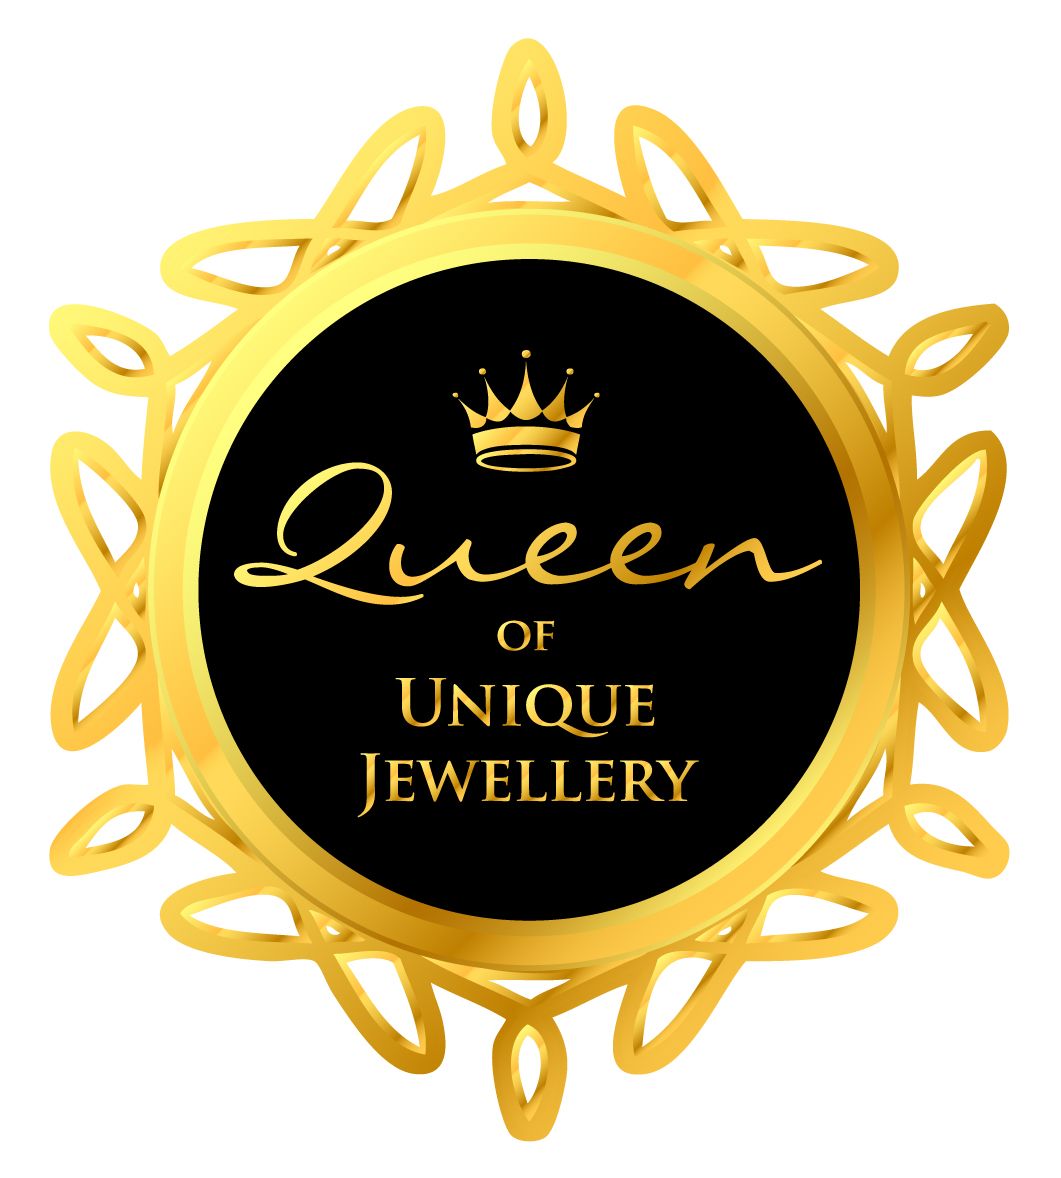 Winner of Queen of Unique Jewellery Award by the Aqua Design Group